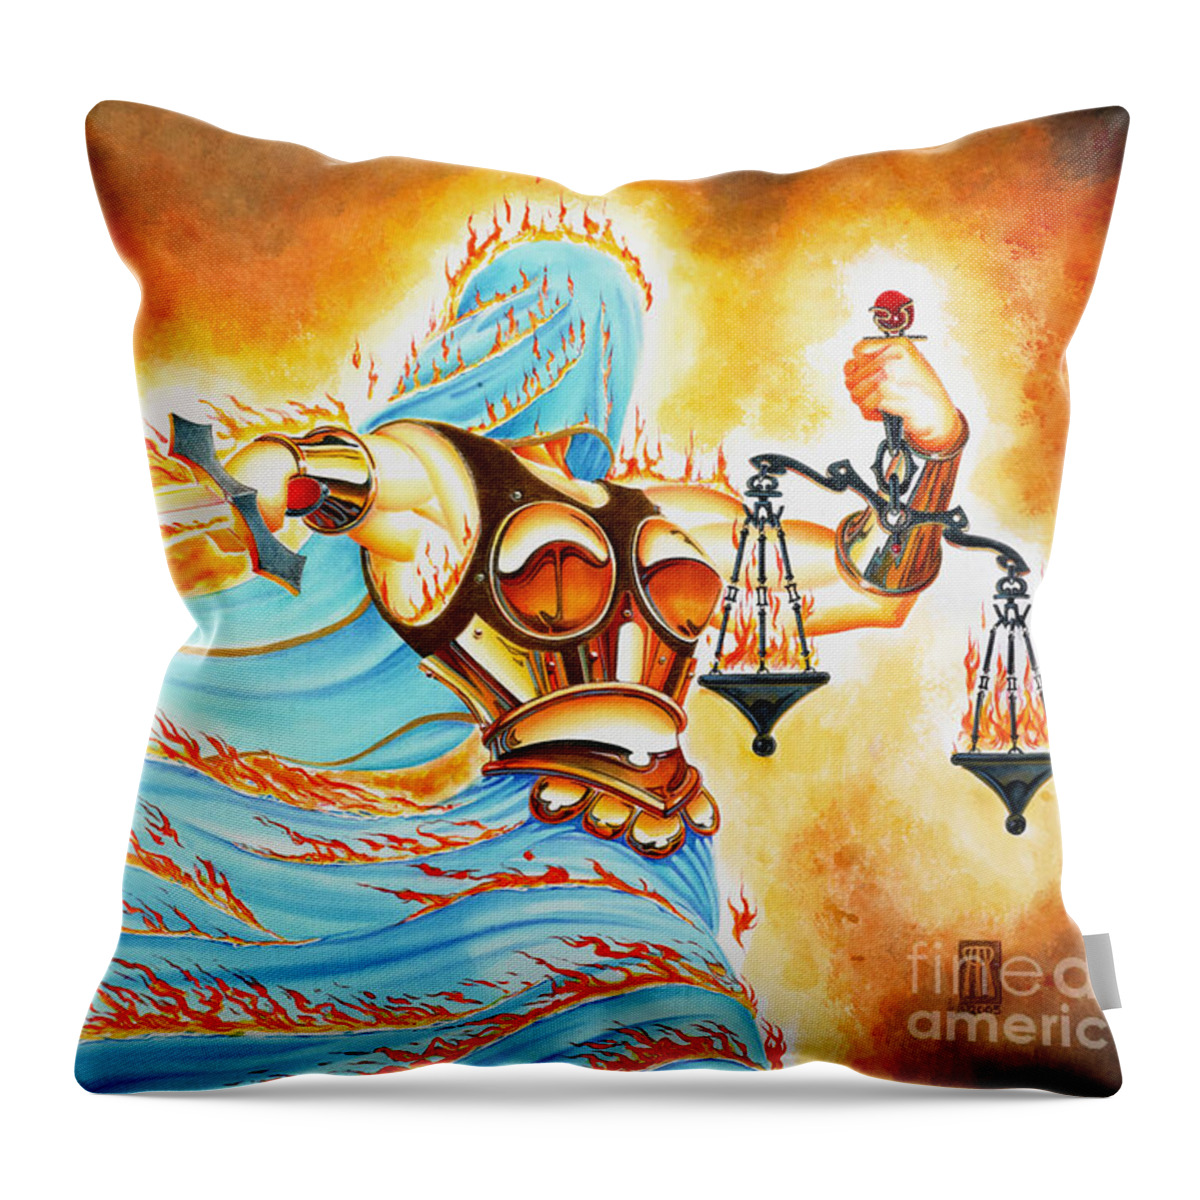 Fantasy Throw Pillow featuring the drawing Fiery Justice by Melissa A Benson